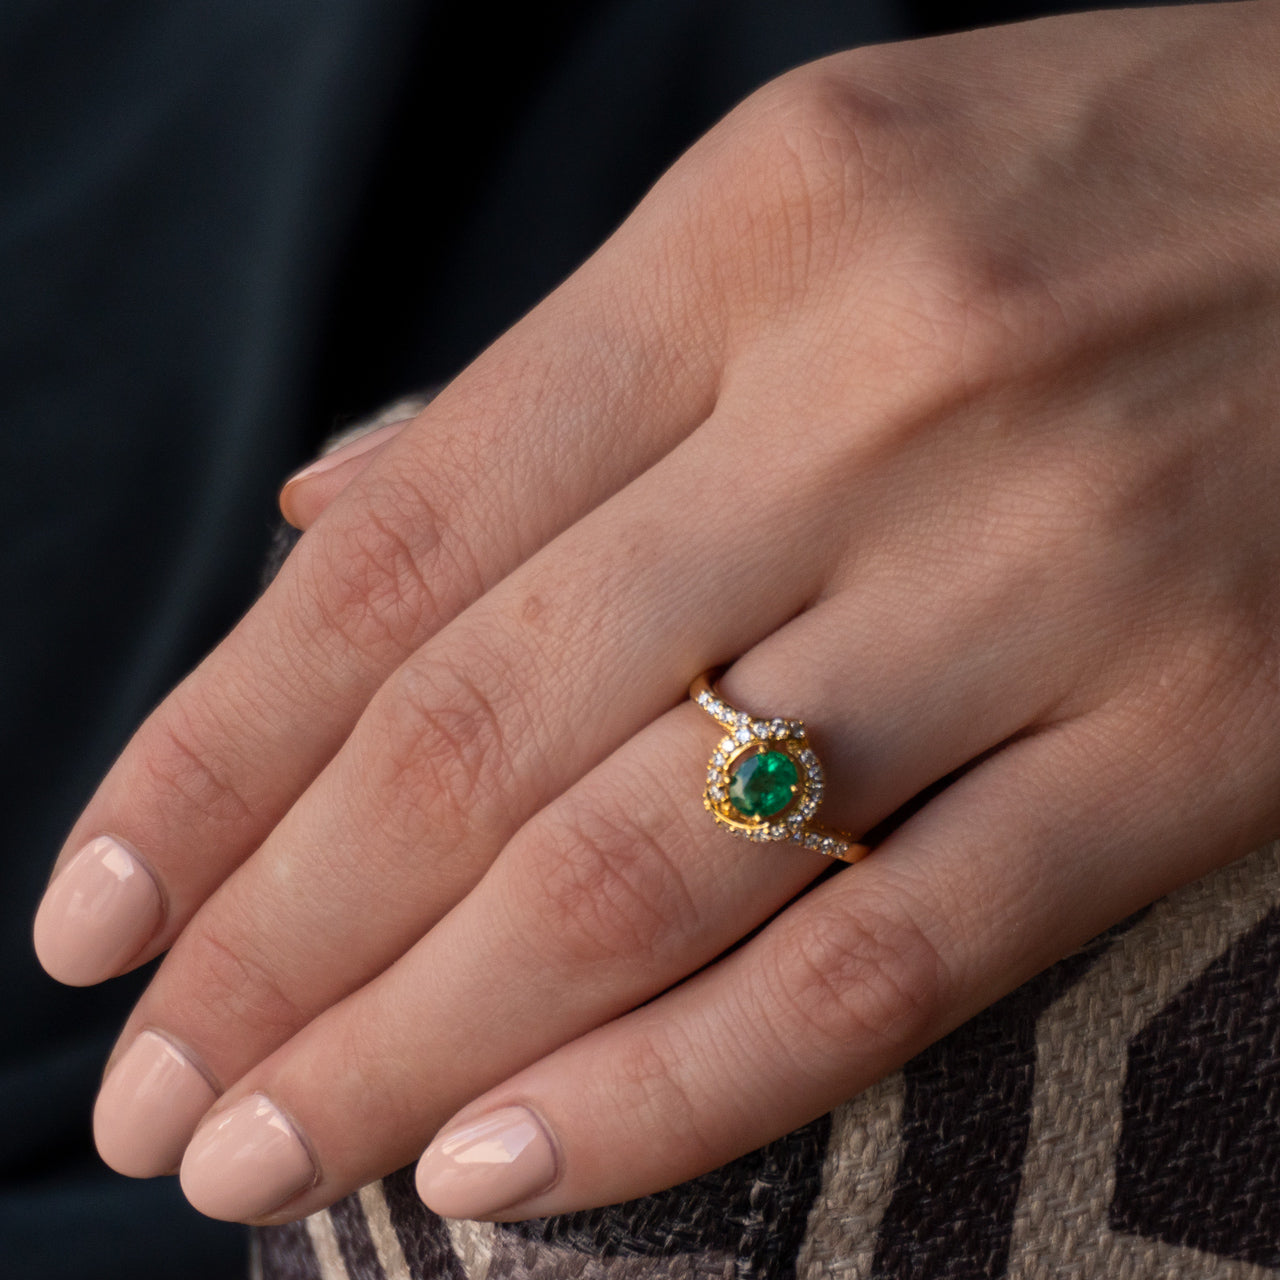 Close-up of a 0.56ct emerald ring on a female hand